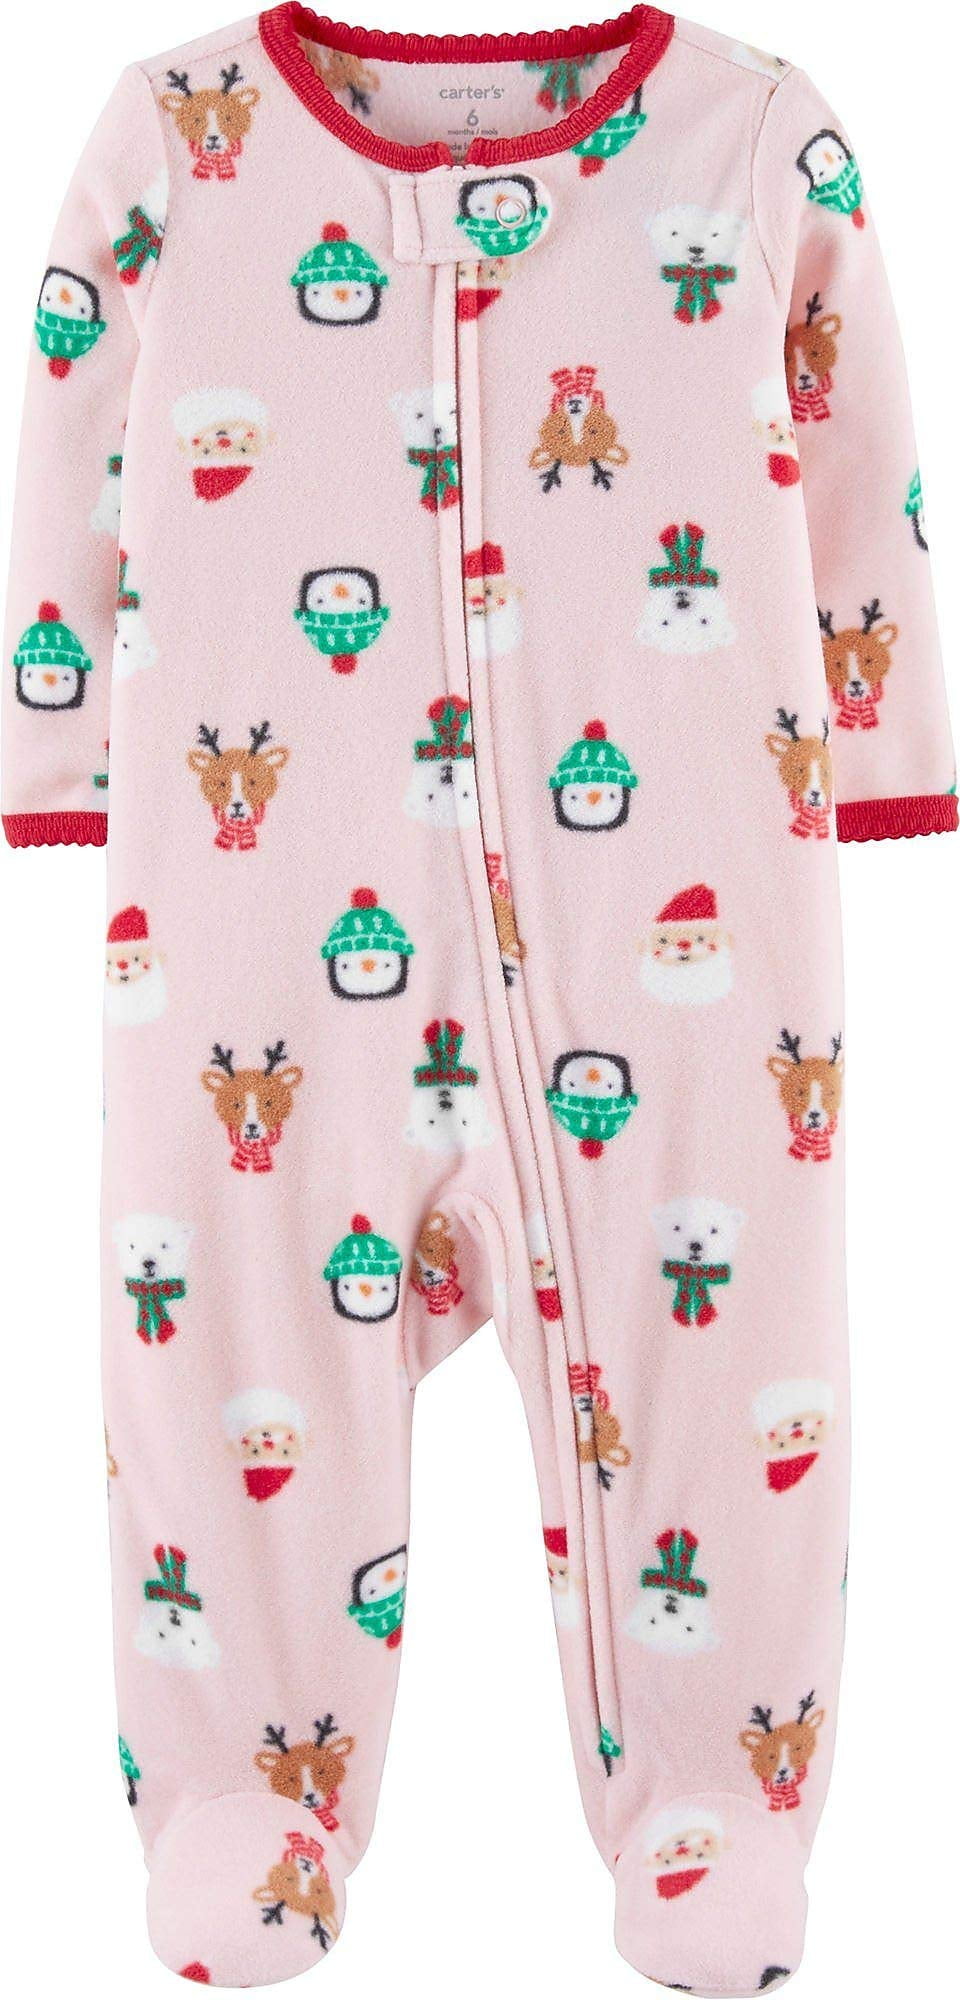 NEW Carter's Just One Year My 1st Christmas Winter sleep & play Baby 3 m months